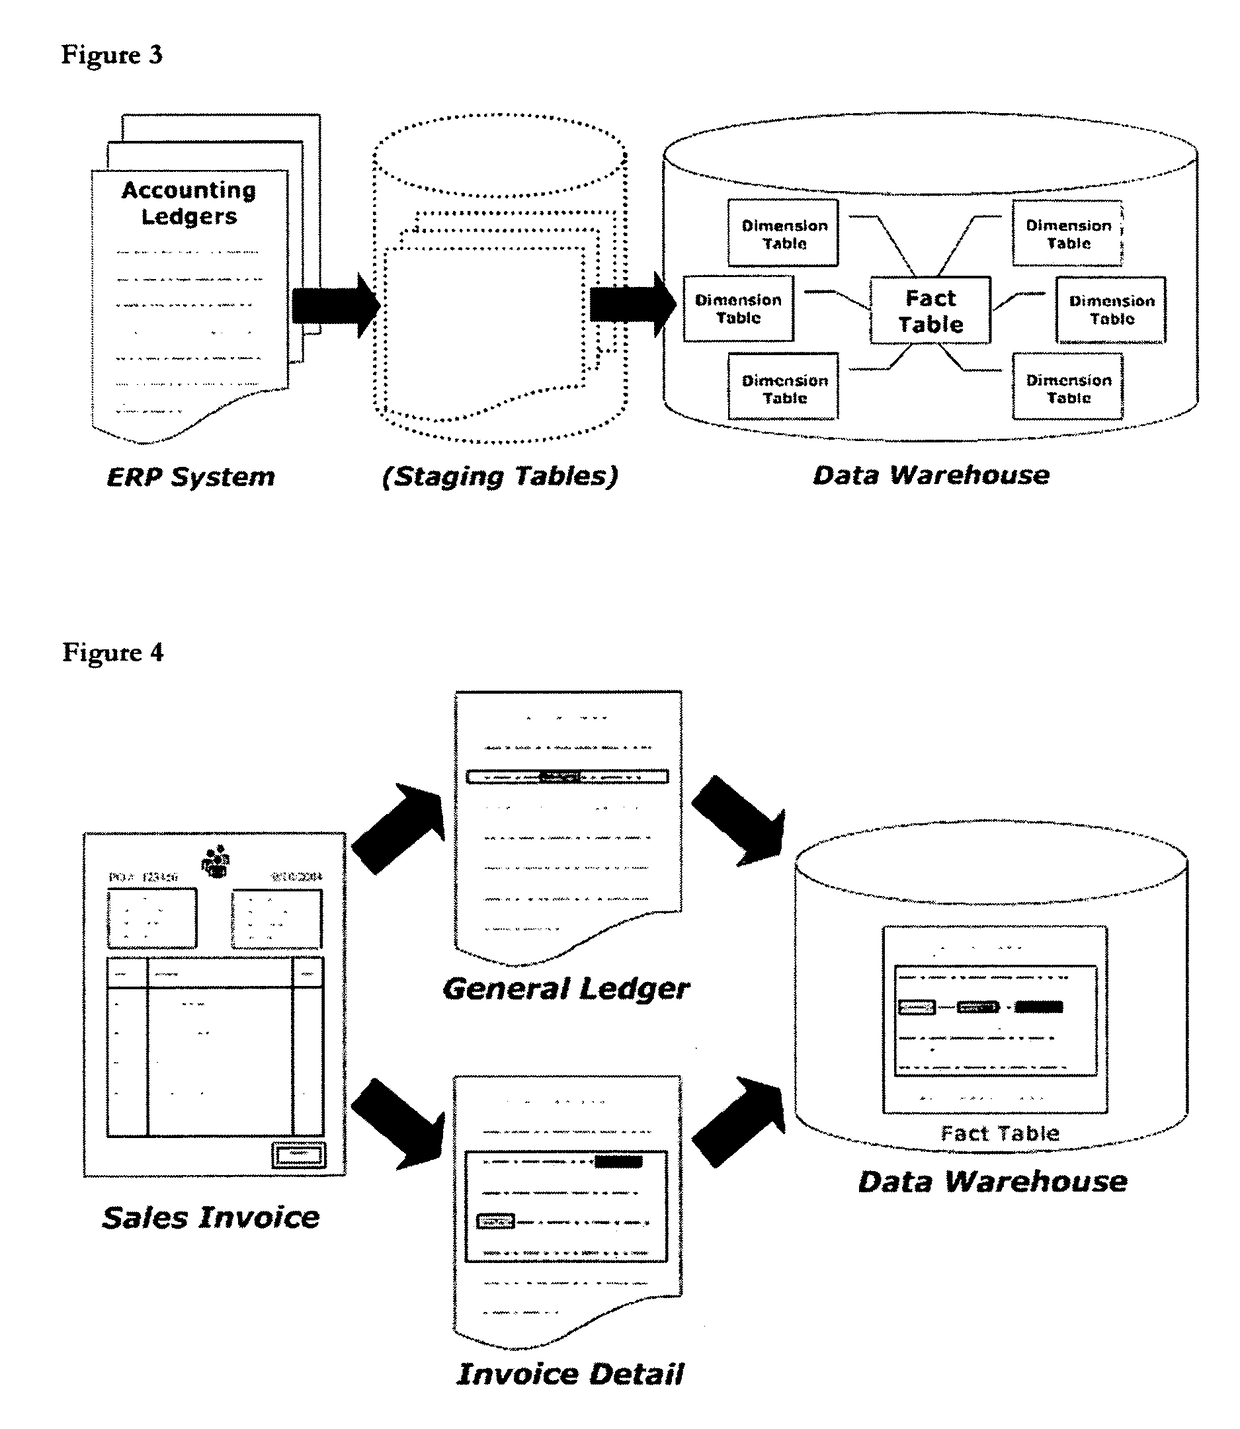 Method and apparatus for automatically creating a data warehouse and OLAP cube